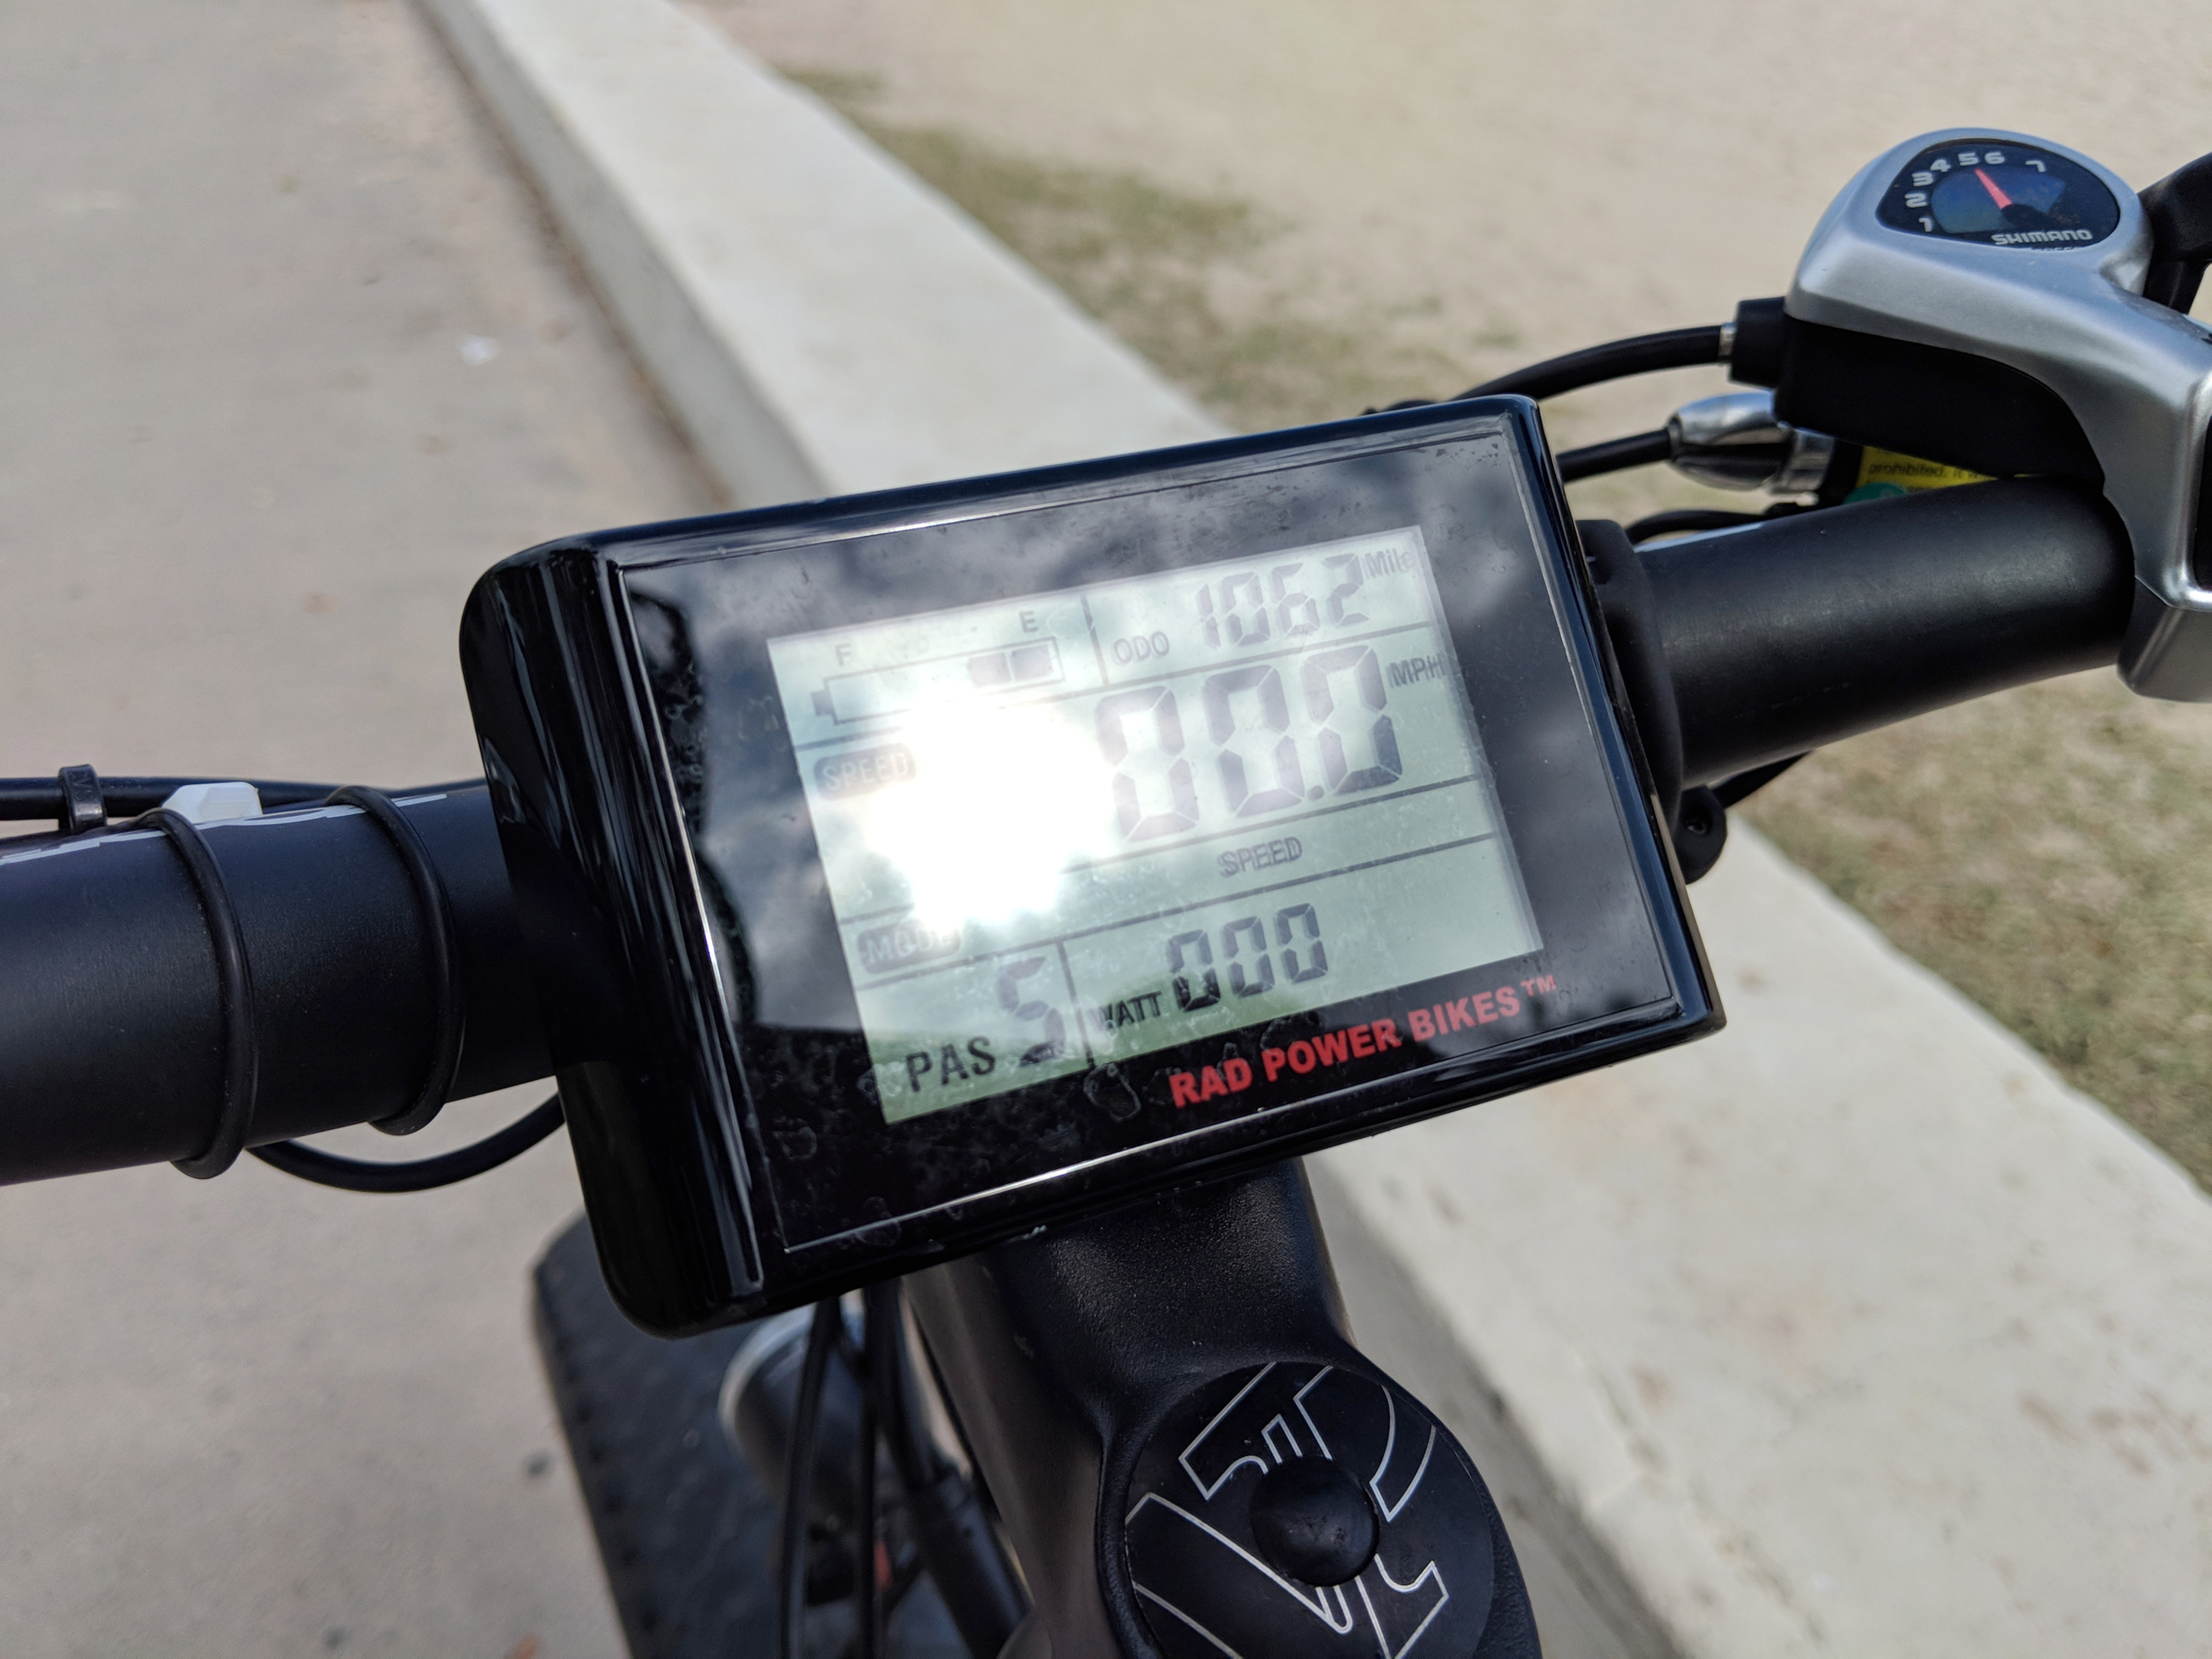 A person riding an electric bike with an LCD display and pedal assistance